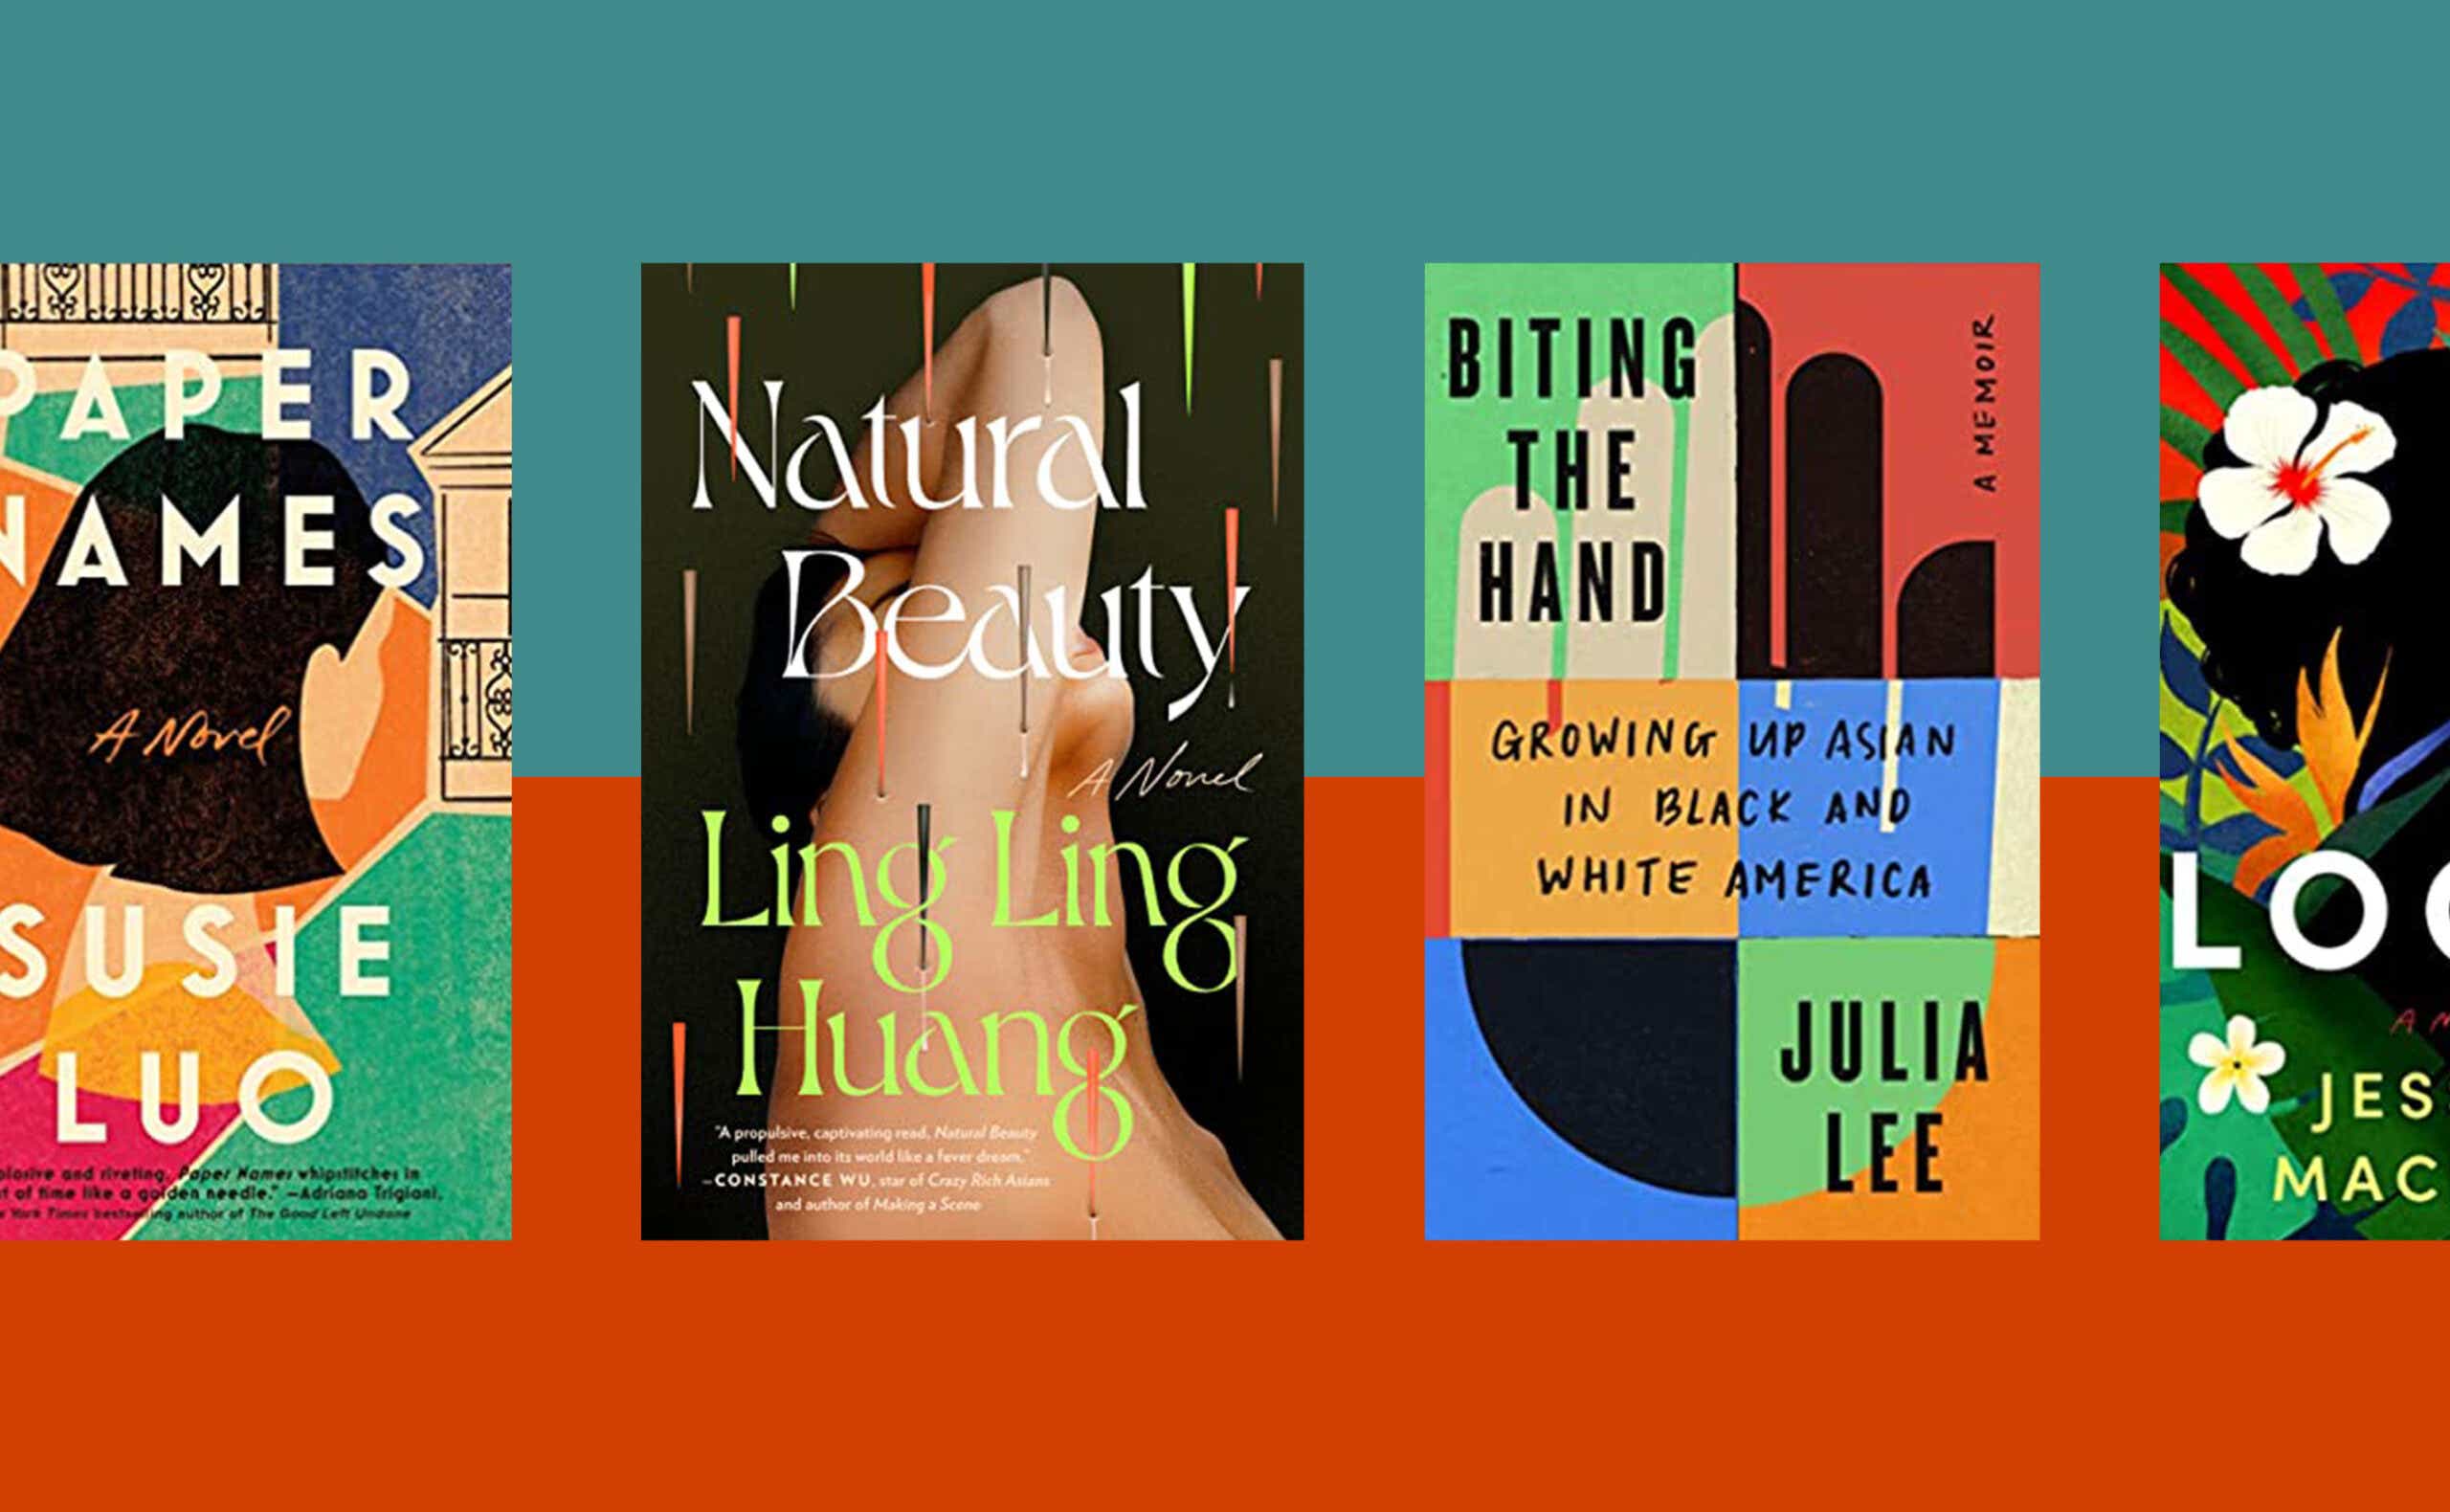 Biting the Hand, Natural Beauty, Local, and Paper Names book covers on teal and orange background